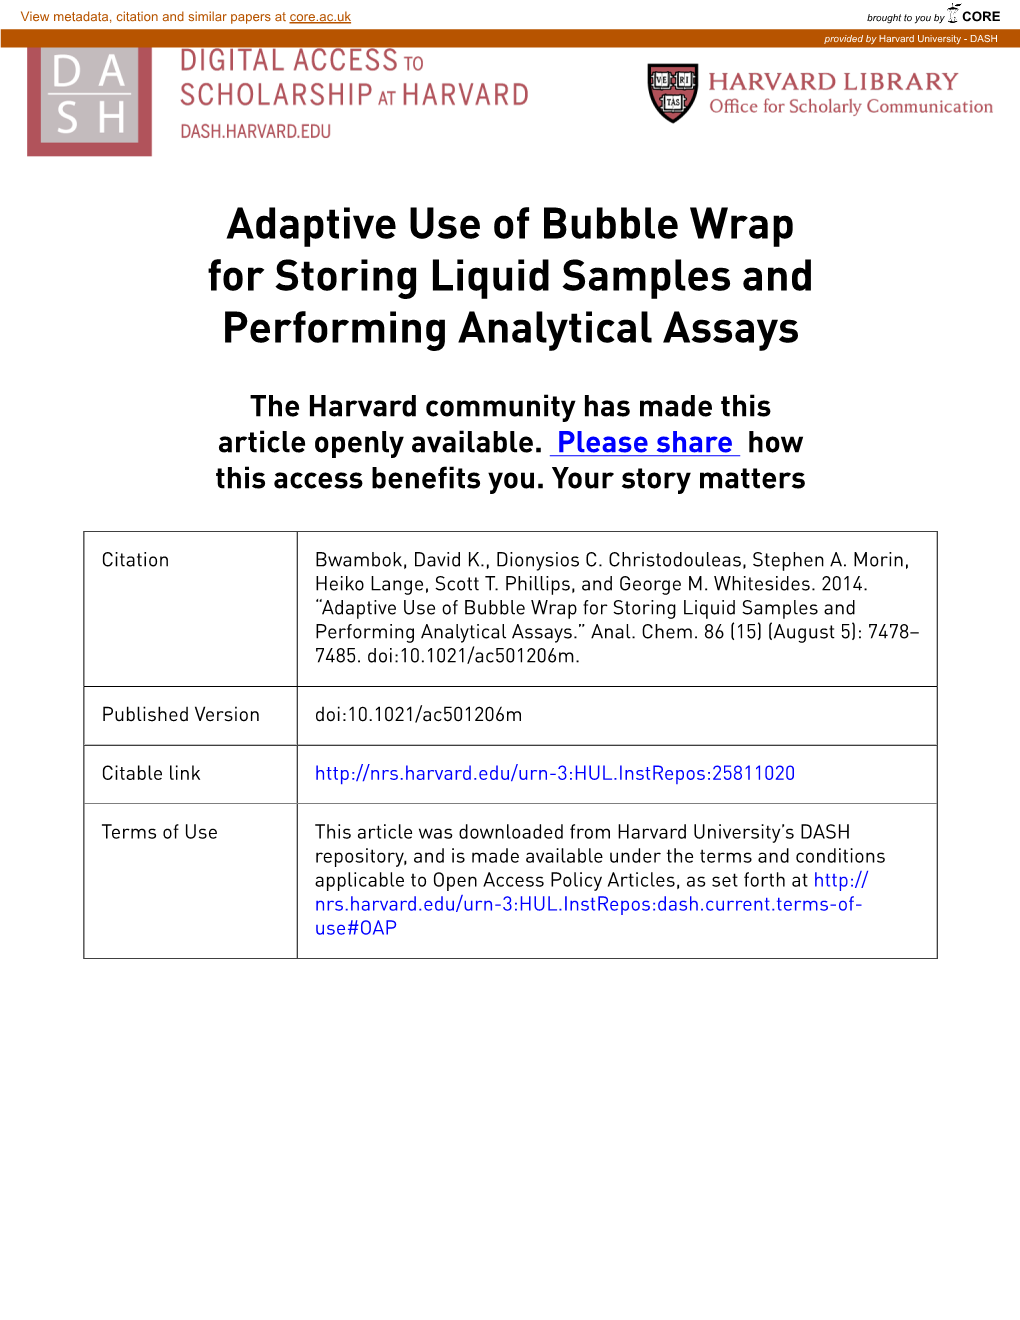 Adaptive Use of Bubble Wrap As a Low-Cost Sterile Container For